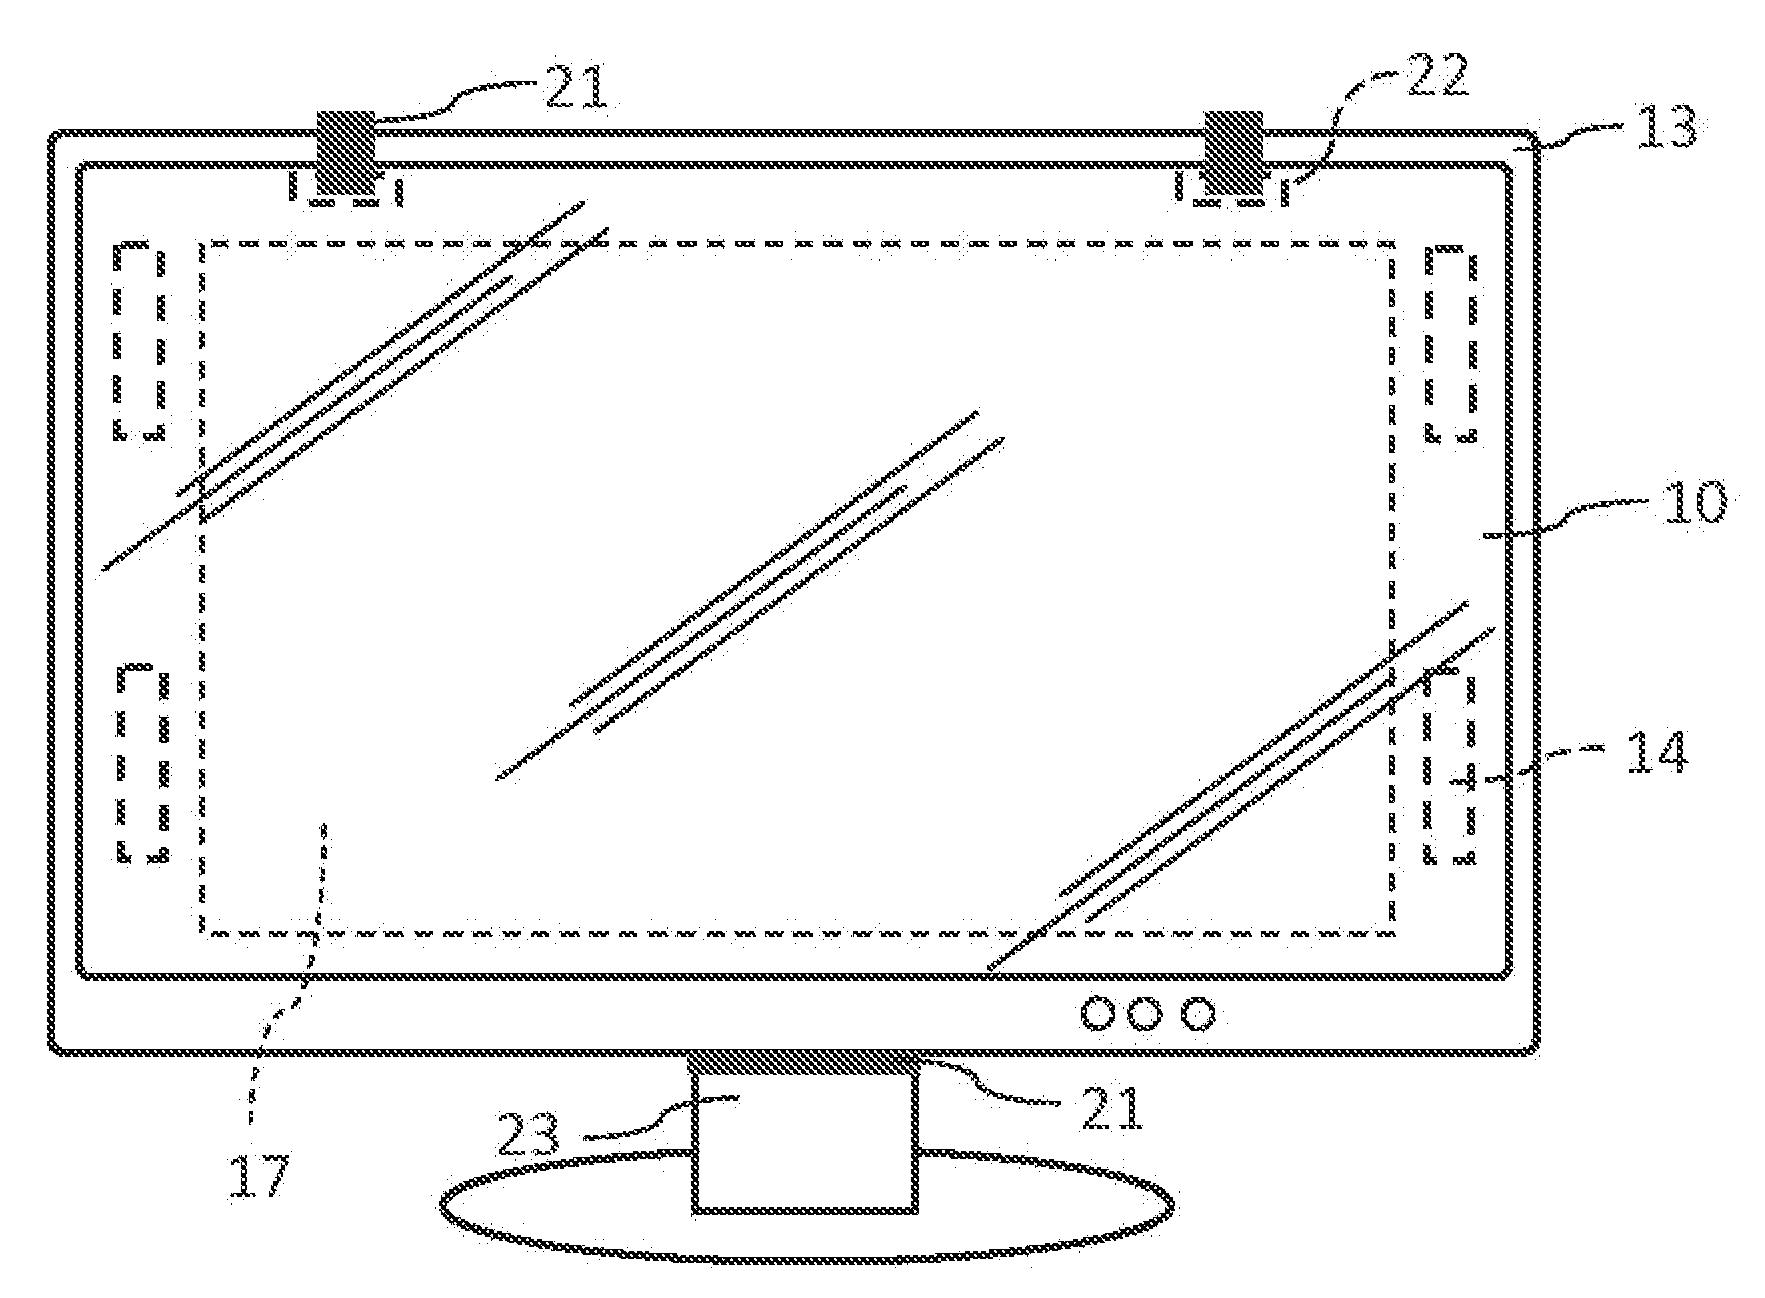 Detachable screen guard assembly and method for securing a screen protector